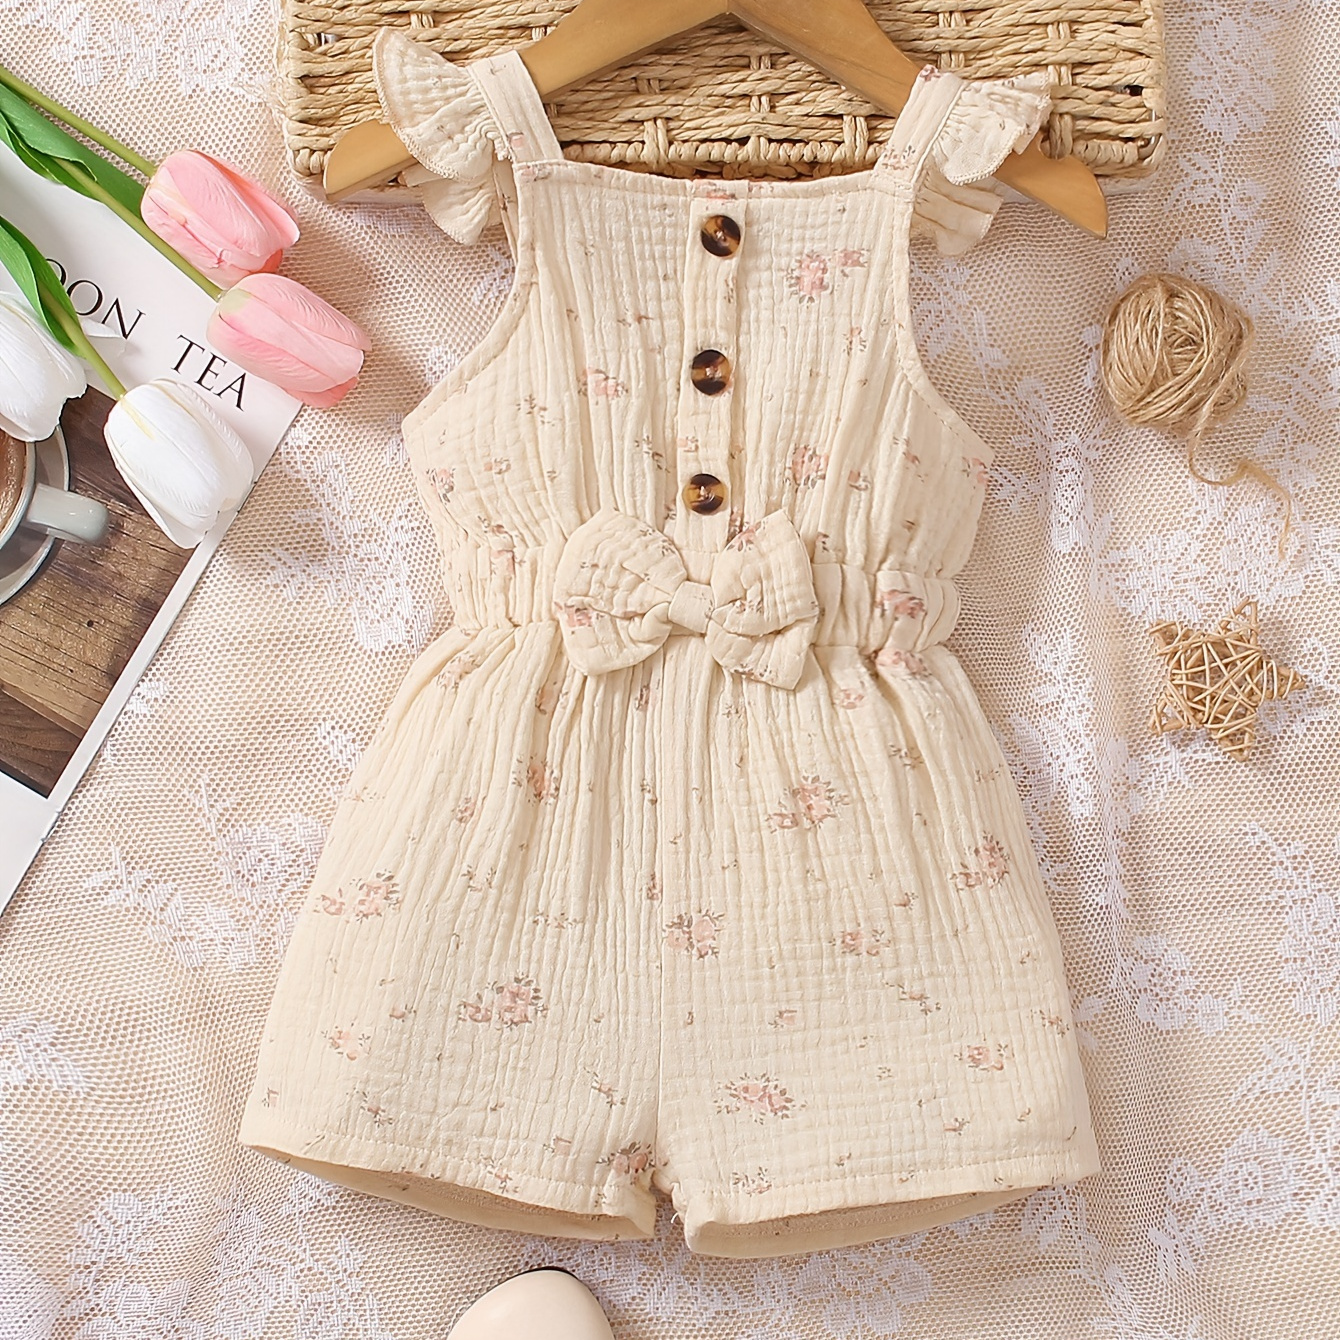 

Baby's Pastoral Style Floral Pattern Cotton Muslin Bodysuit, Casual Bowknot & Button Decor Cap Sleeve Onesie, Toddler & Infant Girl's Clothing For Summer